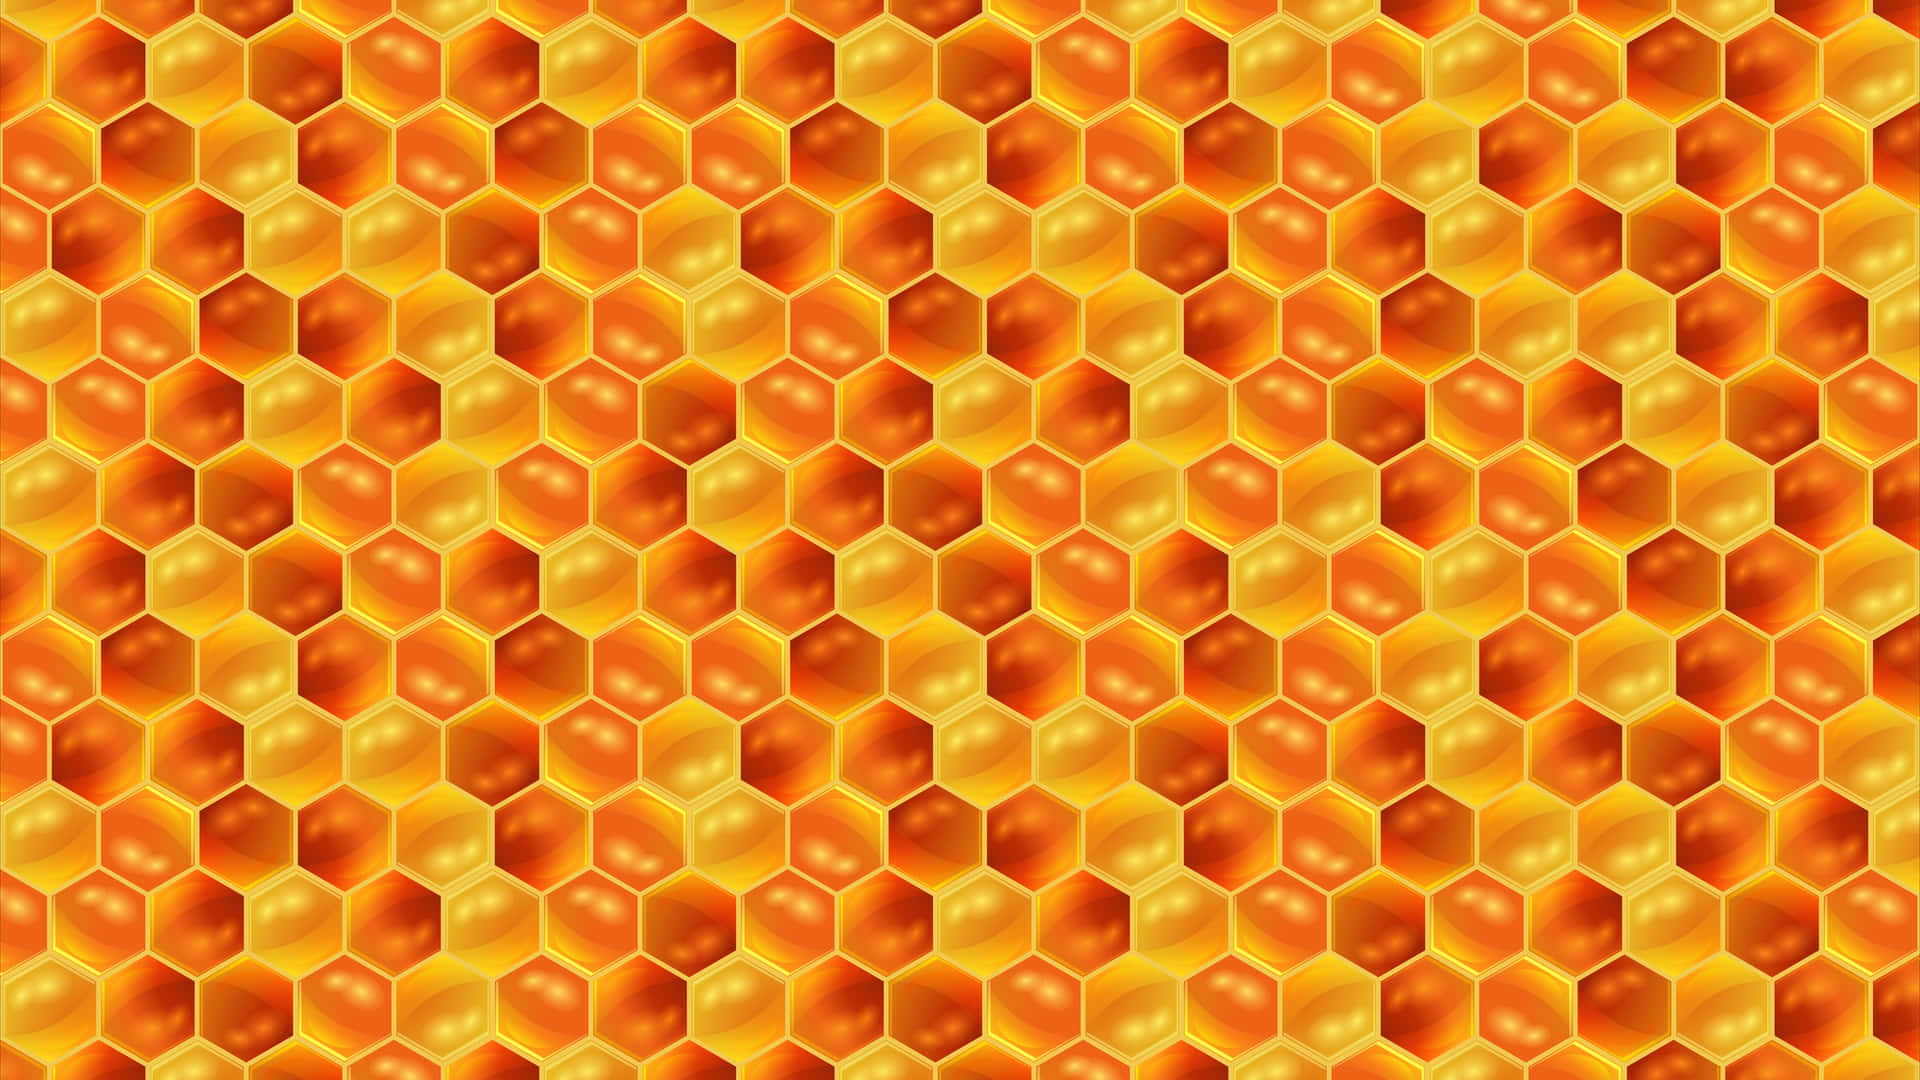 A stunning, super-high resolution picture of a vibrant blue hexagon surrounded by pink, orange and yellow rings. Wallpaper